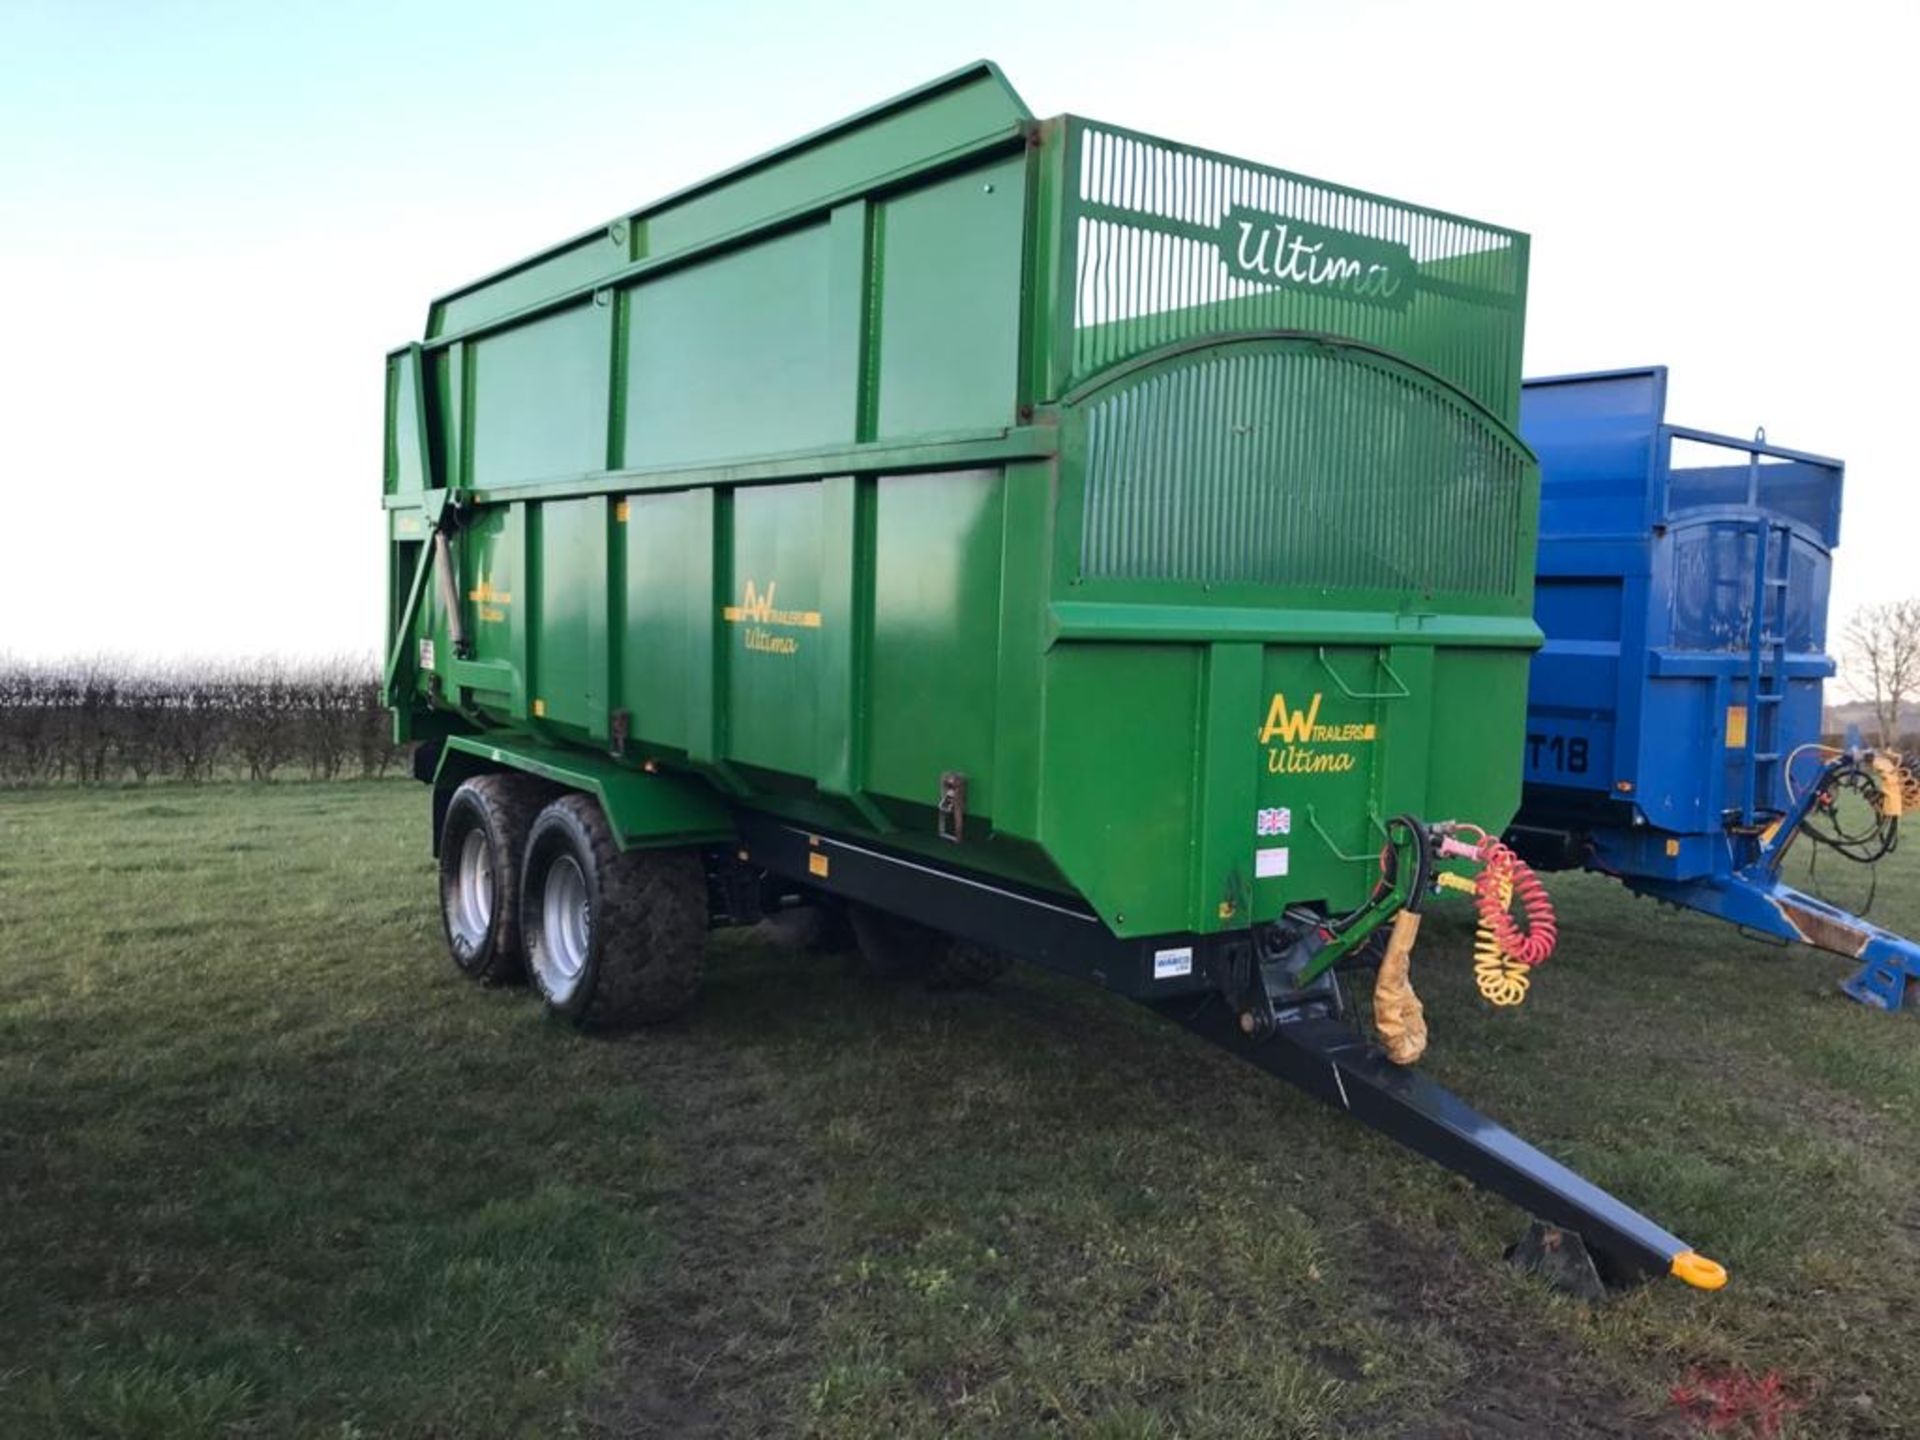 2015 AW 16 Tonne Ultima Silage Trailer, Hyd. Back Door, Sprung Drawbar, 560/65 R22.5 Tyres - Image 2 of 6